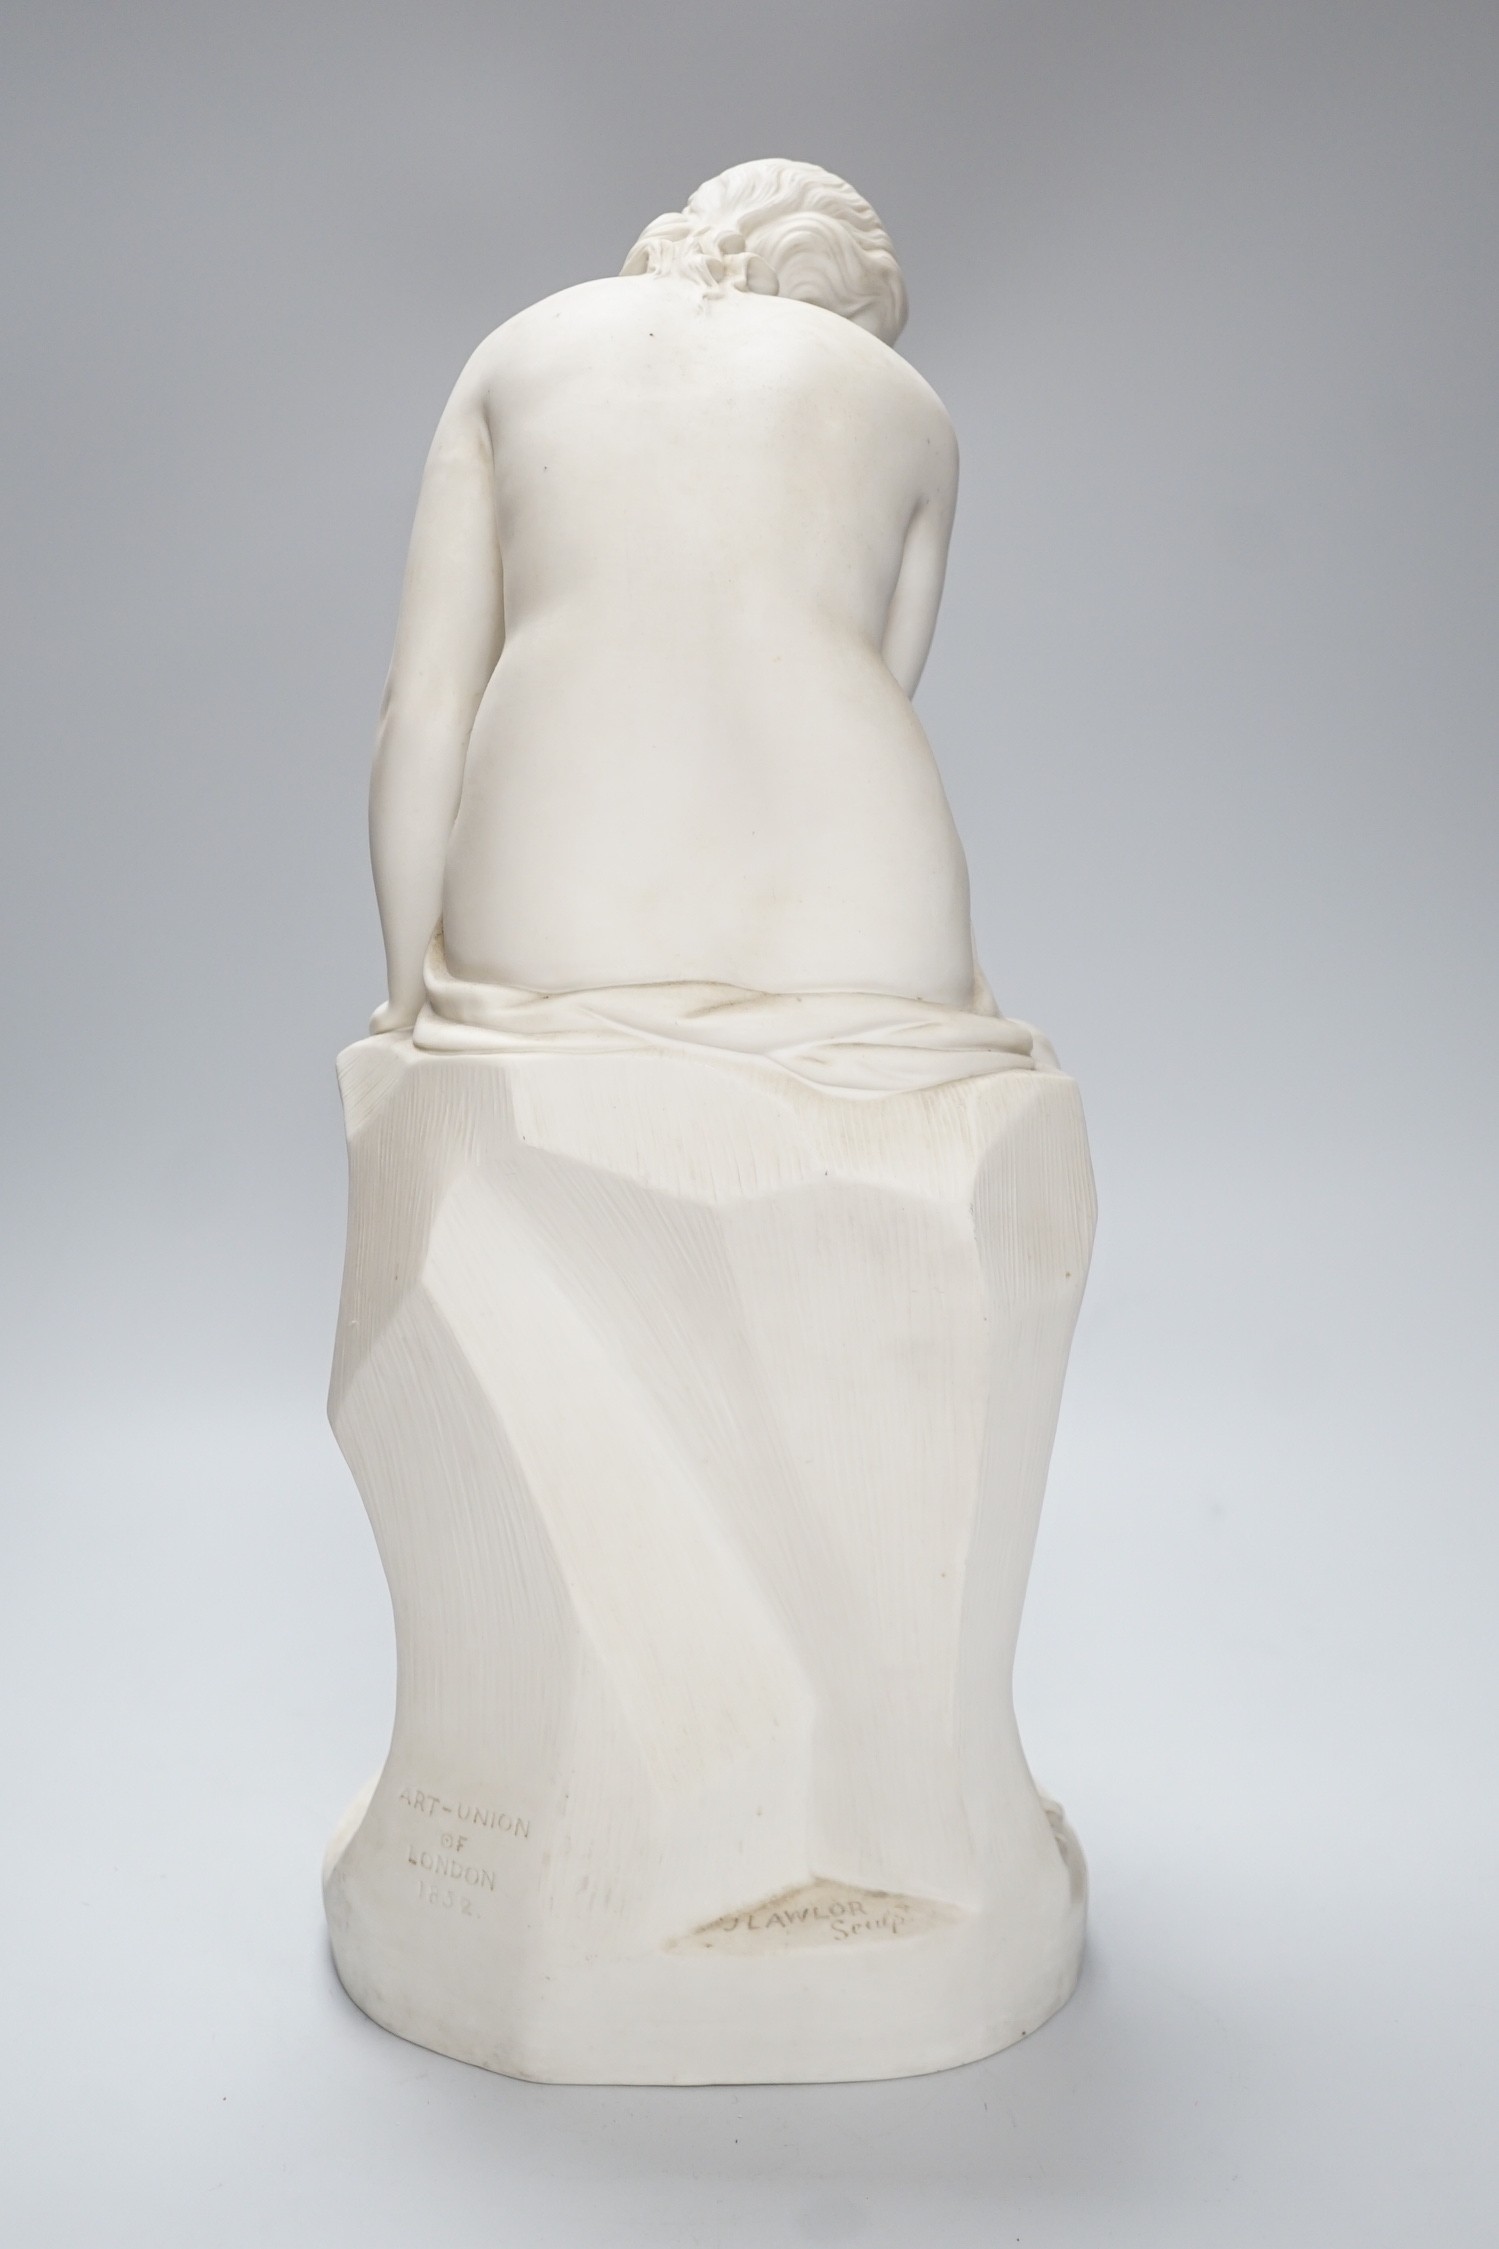 A Mintons Parian figure, Solitude, issued by the Art Union of London, after the original by John Lawlor, dated 1852, 47cm